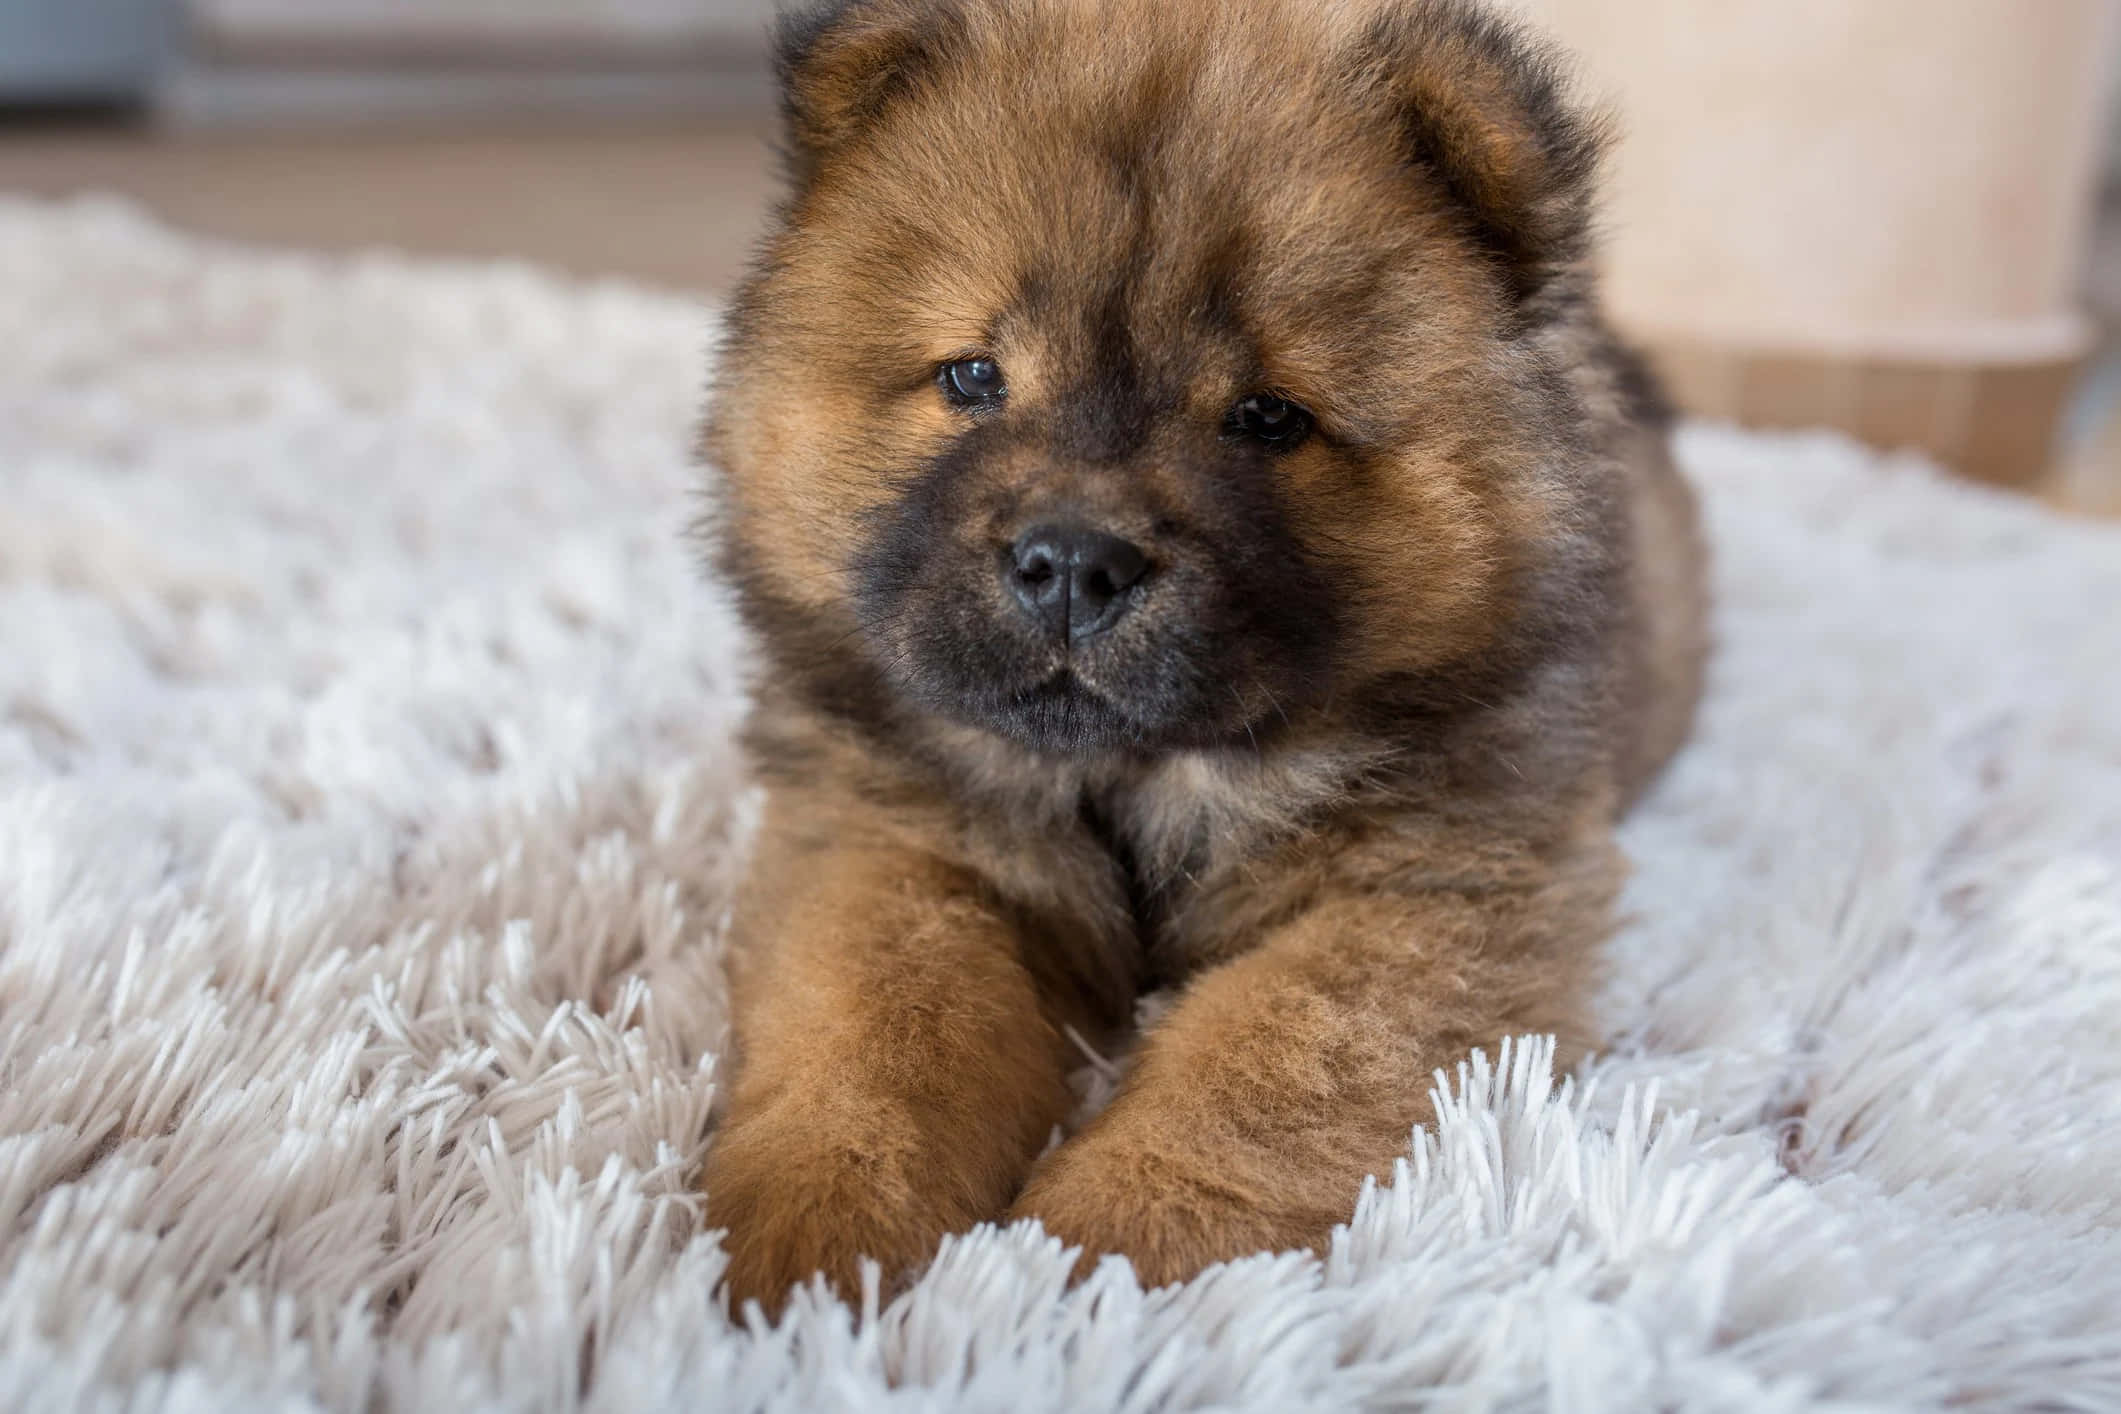 This sweet as honey Chow Chow is ready for a cuddle